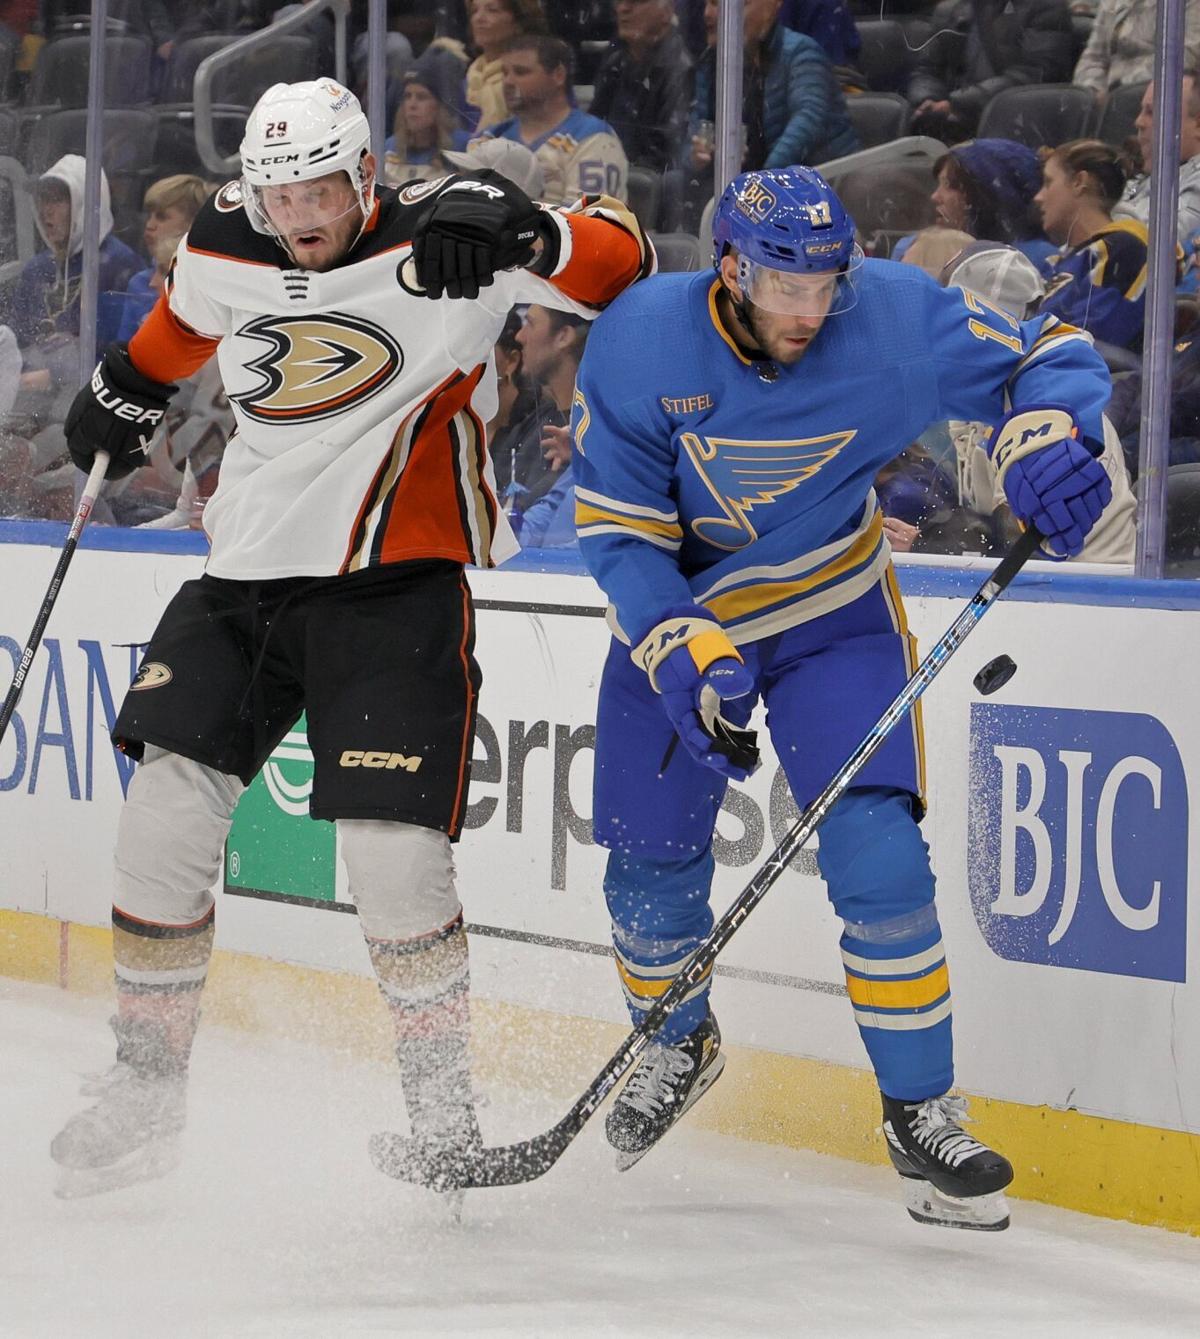 Ducks are routed by Blues, who win their sixth straight game - Los